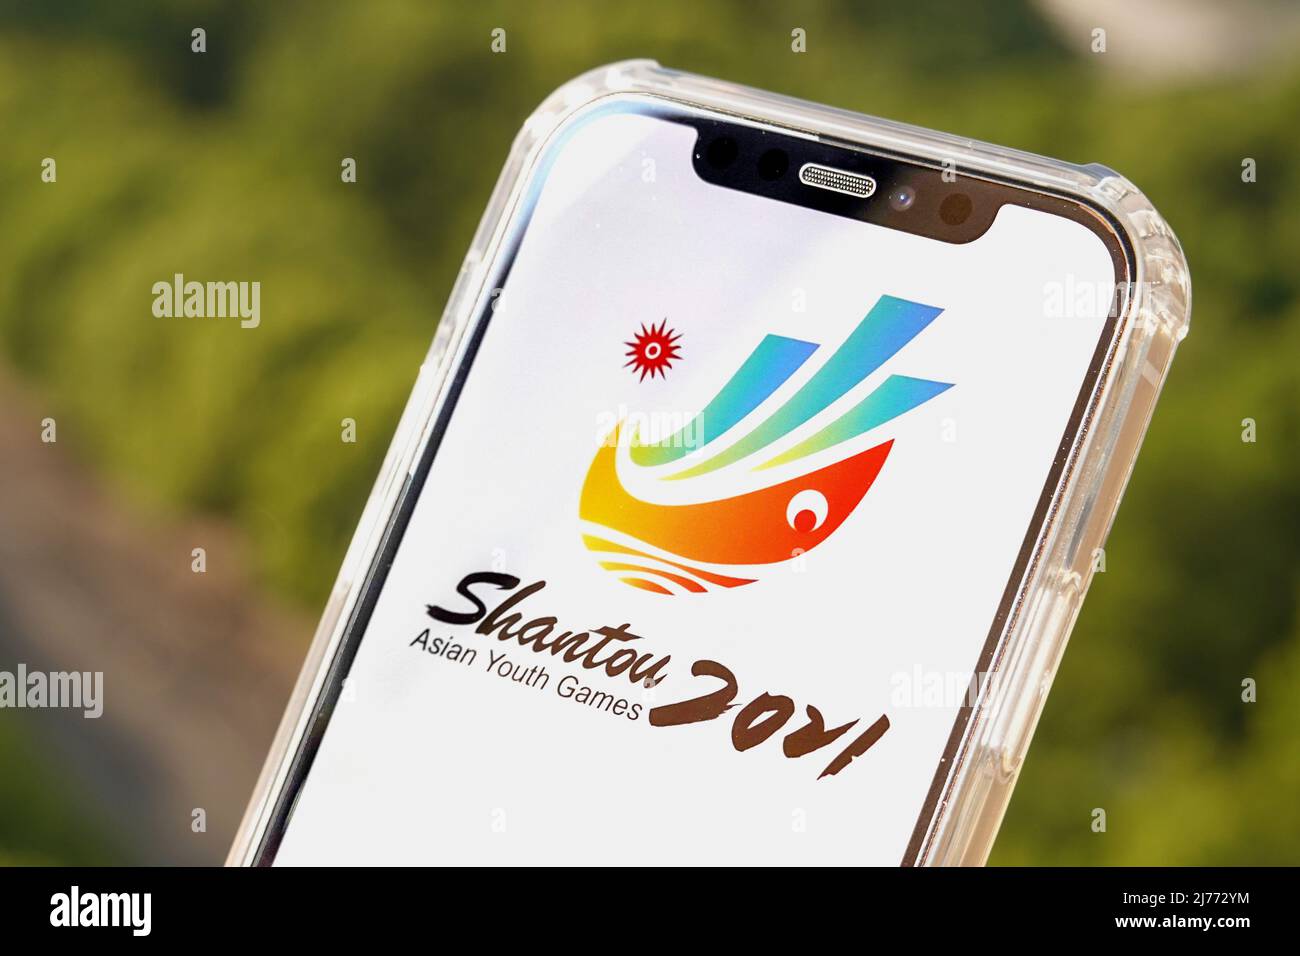 In this photo illustration, the logo of Chengdu World University Games is displayed on a smartphone screen. The Chengdu 2021 World University Games has been postponed until 2023, the International University Sports Federation (FISU) announced on Friday.The FISU Games had initially been scheduled for the summer of 2021 but were rescheduled for June this year following the postponement of the Olympic Games in Tokyo 2020. Stock Photo